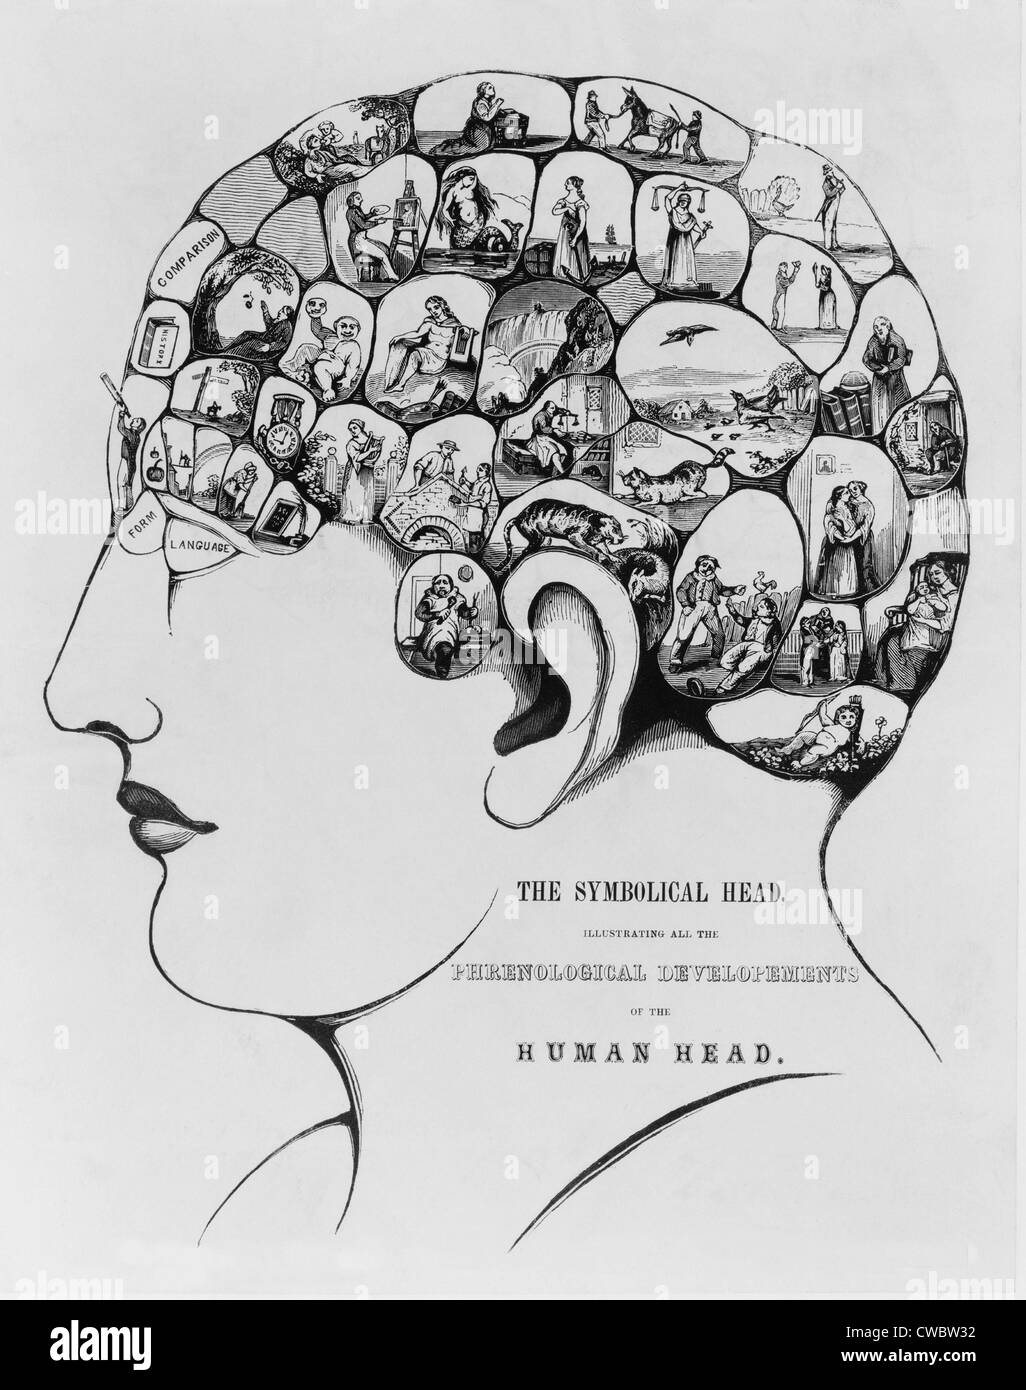 'The Symbolical Head, Illustrating All the Phrenological Developments of the Human Head,' was created by the leading American Stock Photo